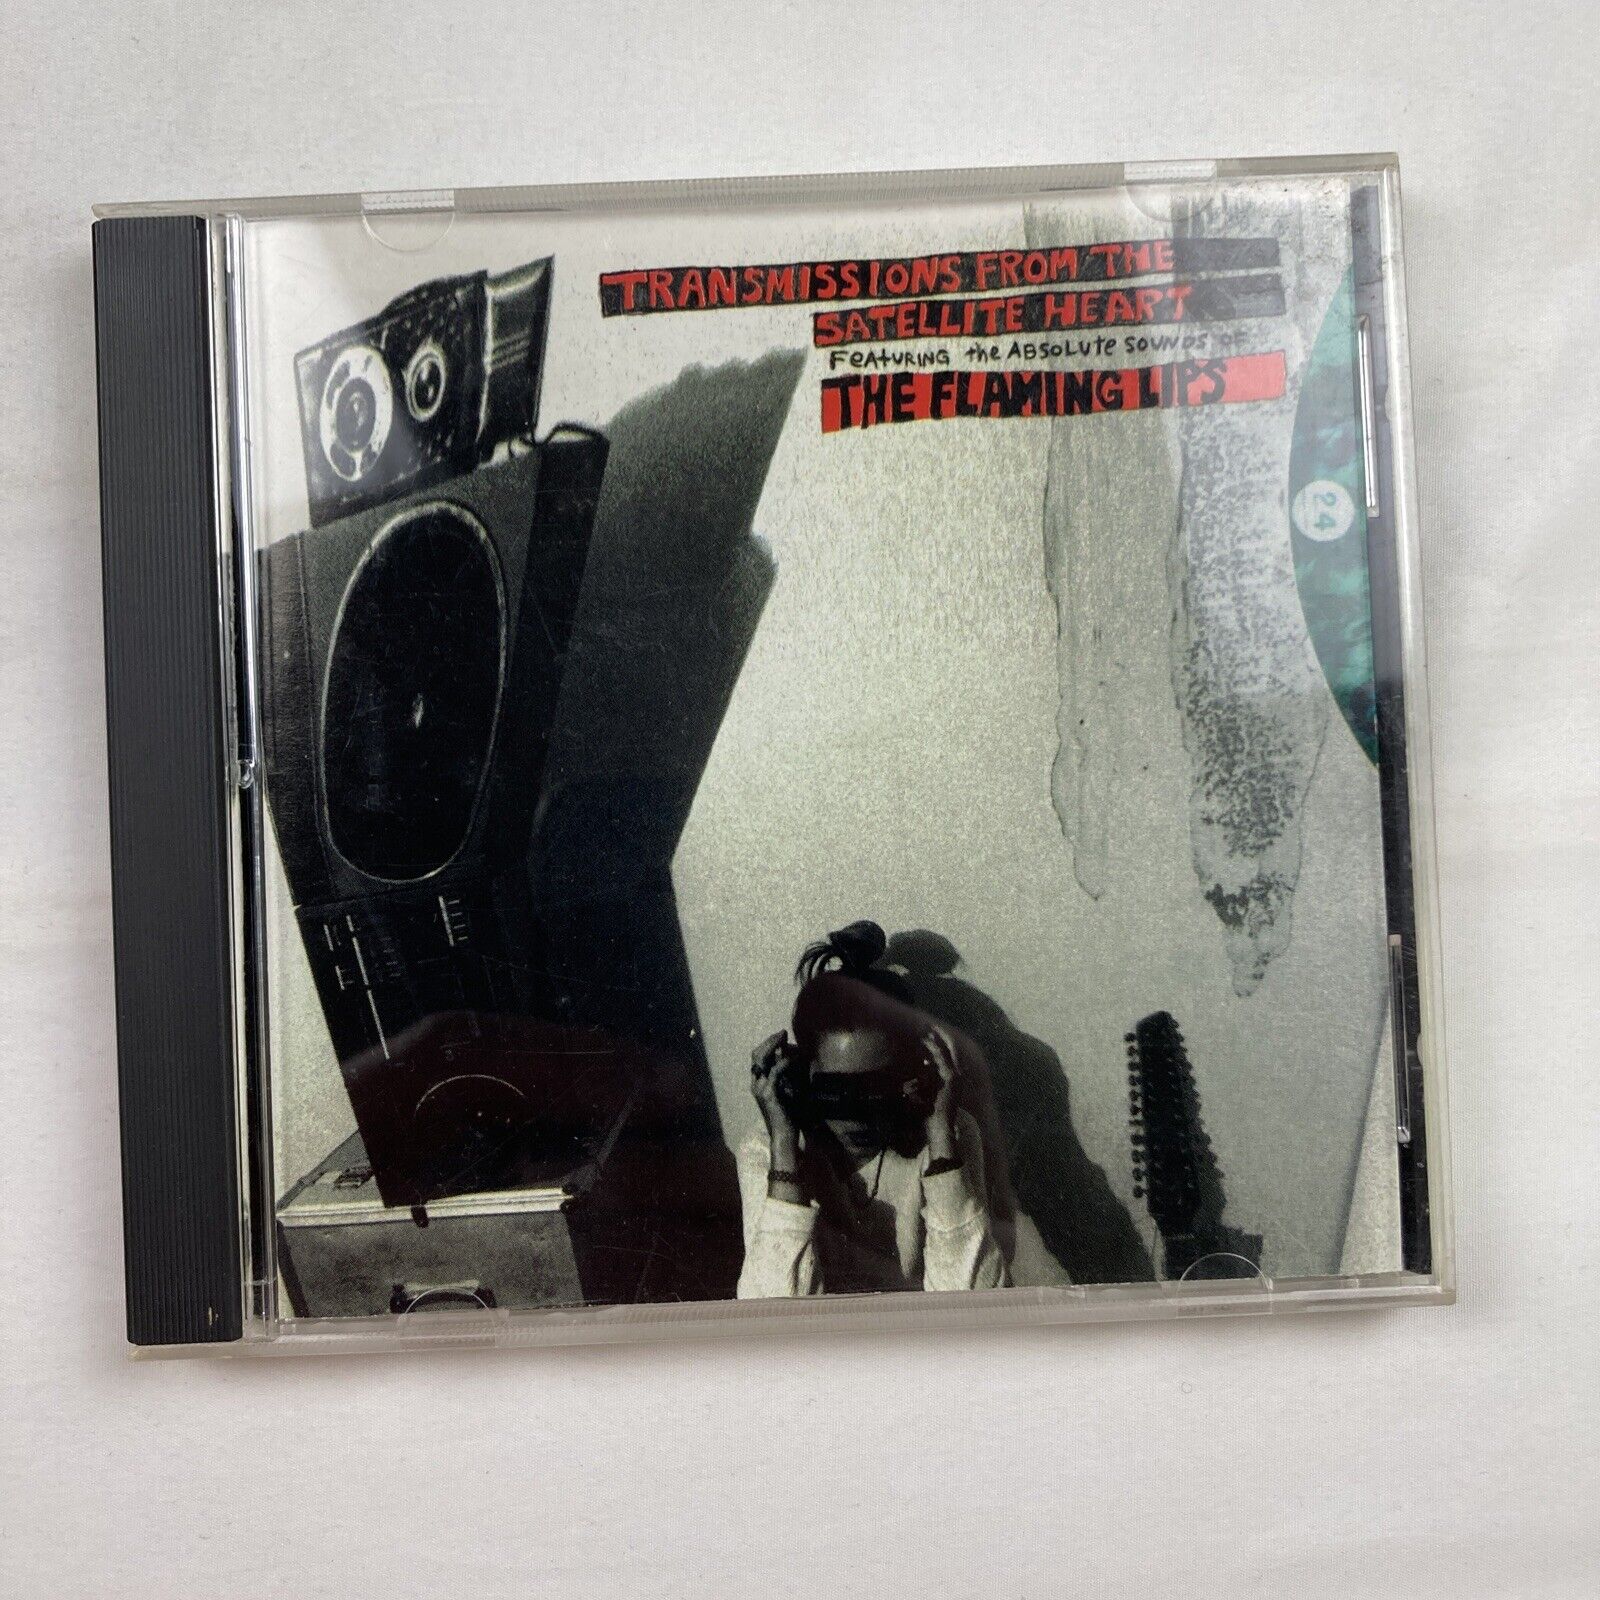 Transmissions from the Satellite Heart by The Flaming Lips (CD, 1993)